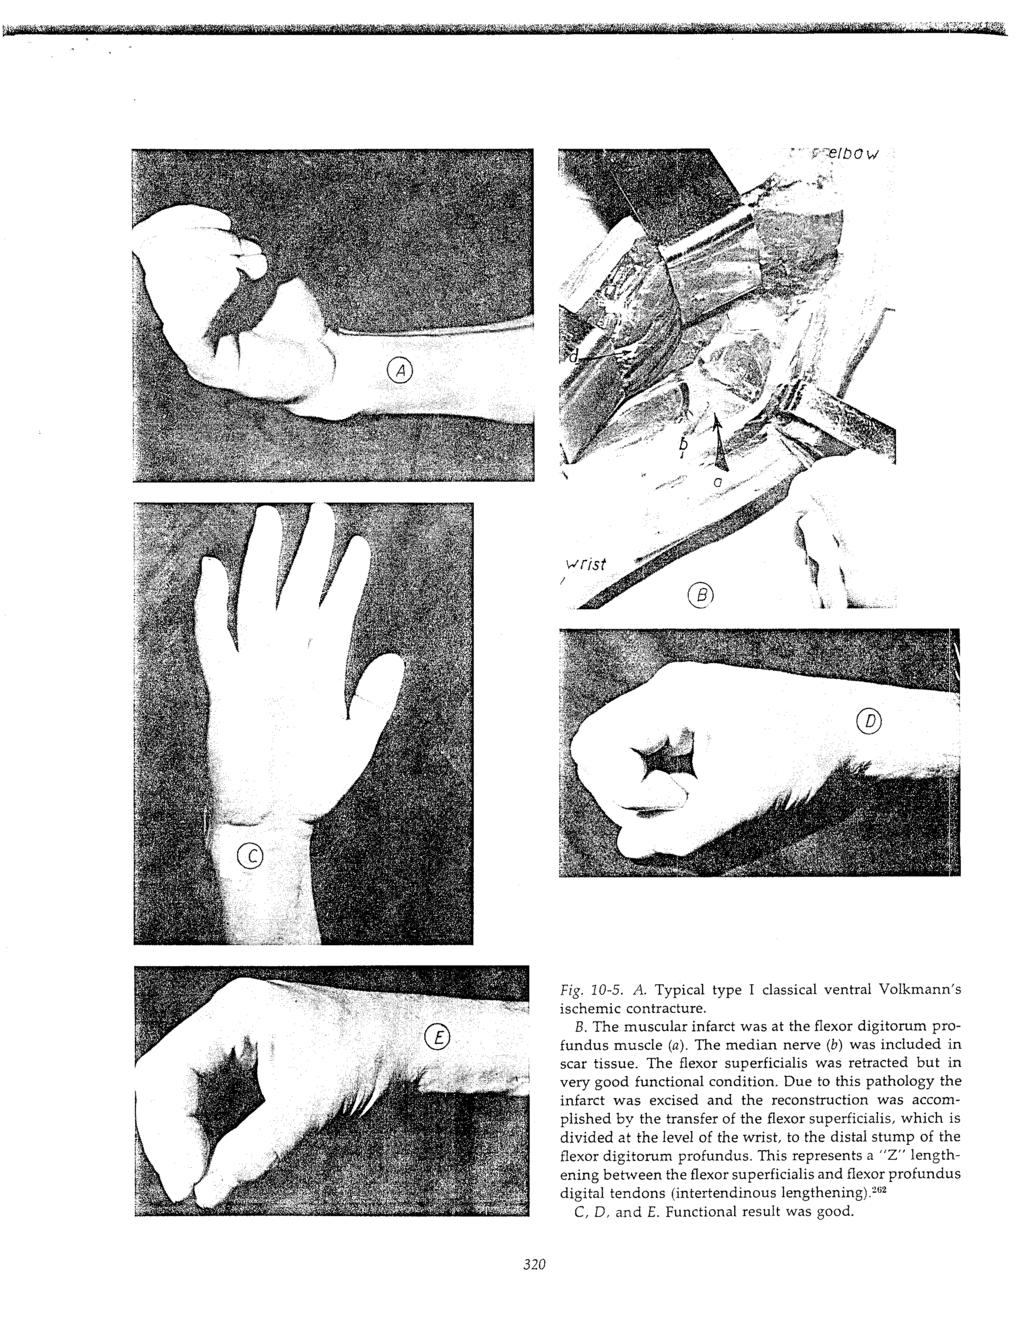 Fig. 10-5. A. Typical type I classical ventral Volkmann s ischemic contracture. B. The muscular infarct was at the flexor digitorum profundus muscle (a). The median nerve (b) was included scar tissue.